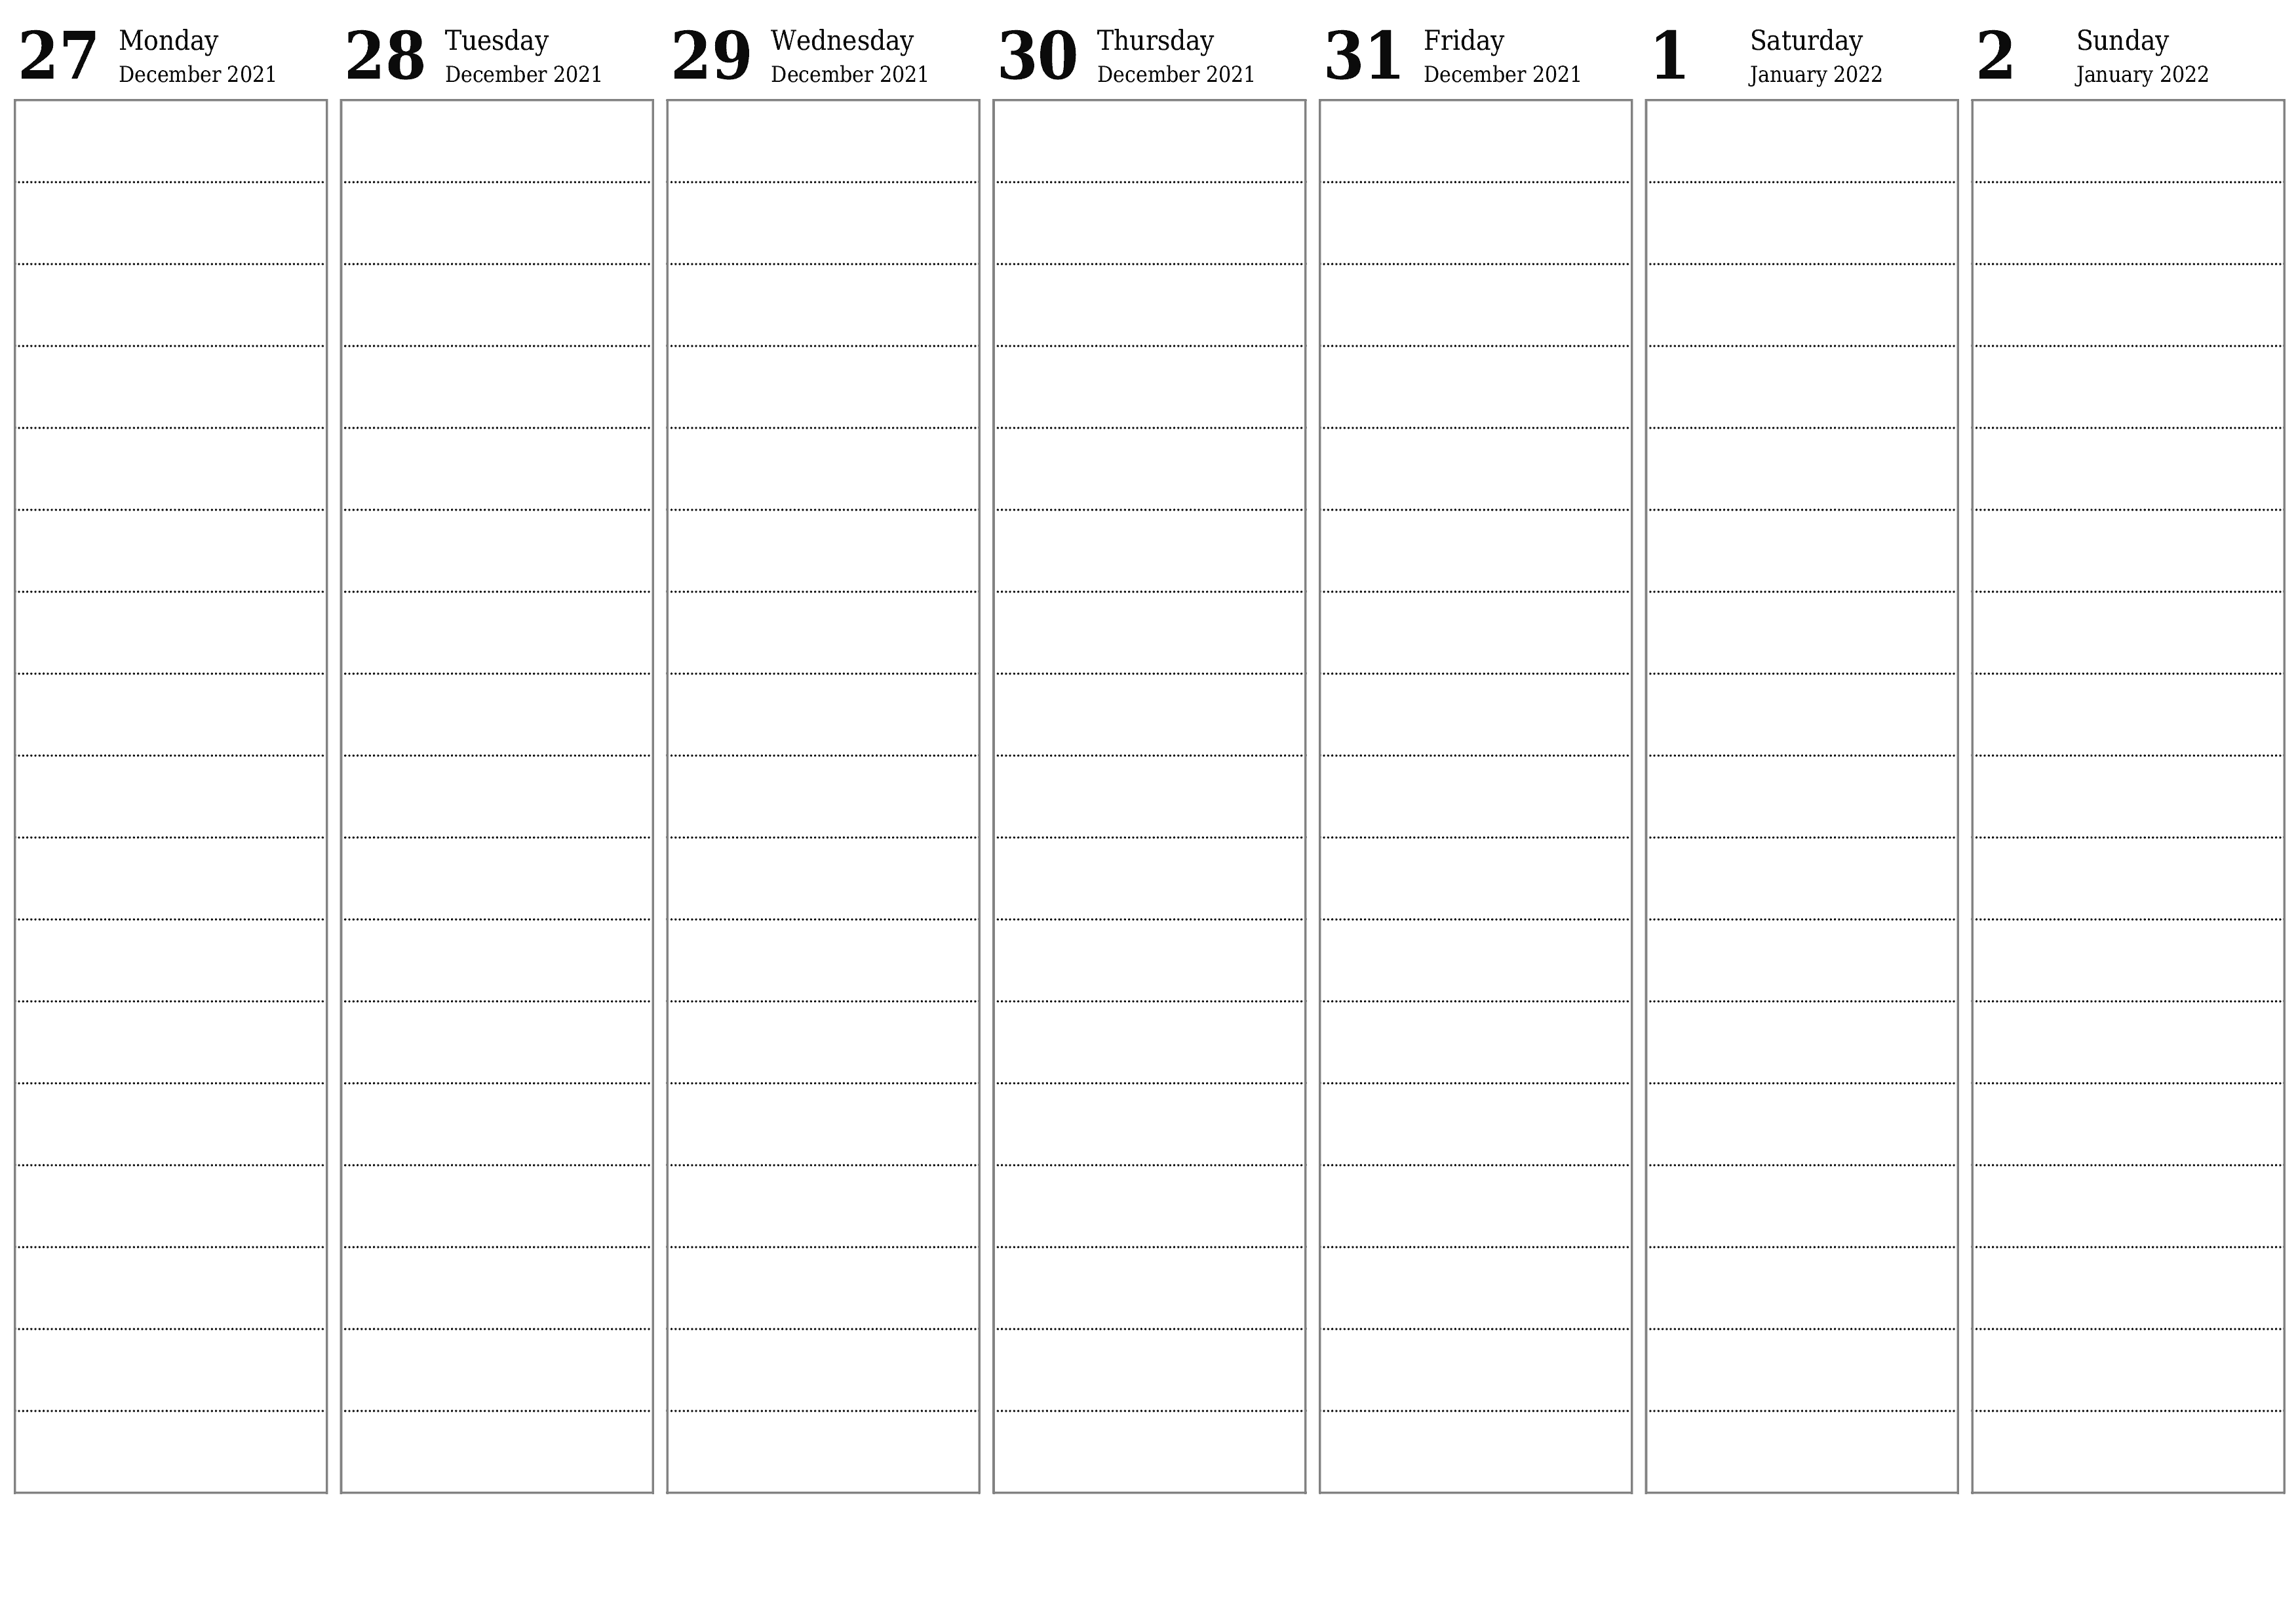 Blank weekly printable calendar and planner for week January 2022 with notes, save and print to PDF PNG English - 7calendar.com